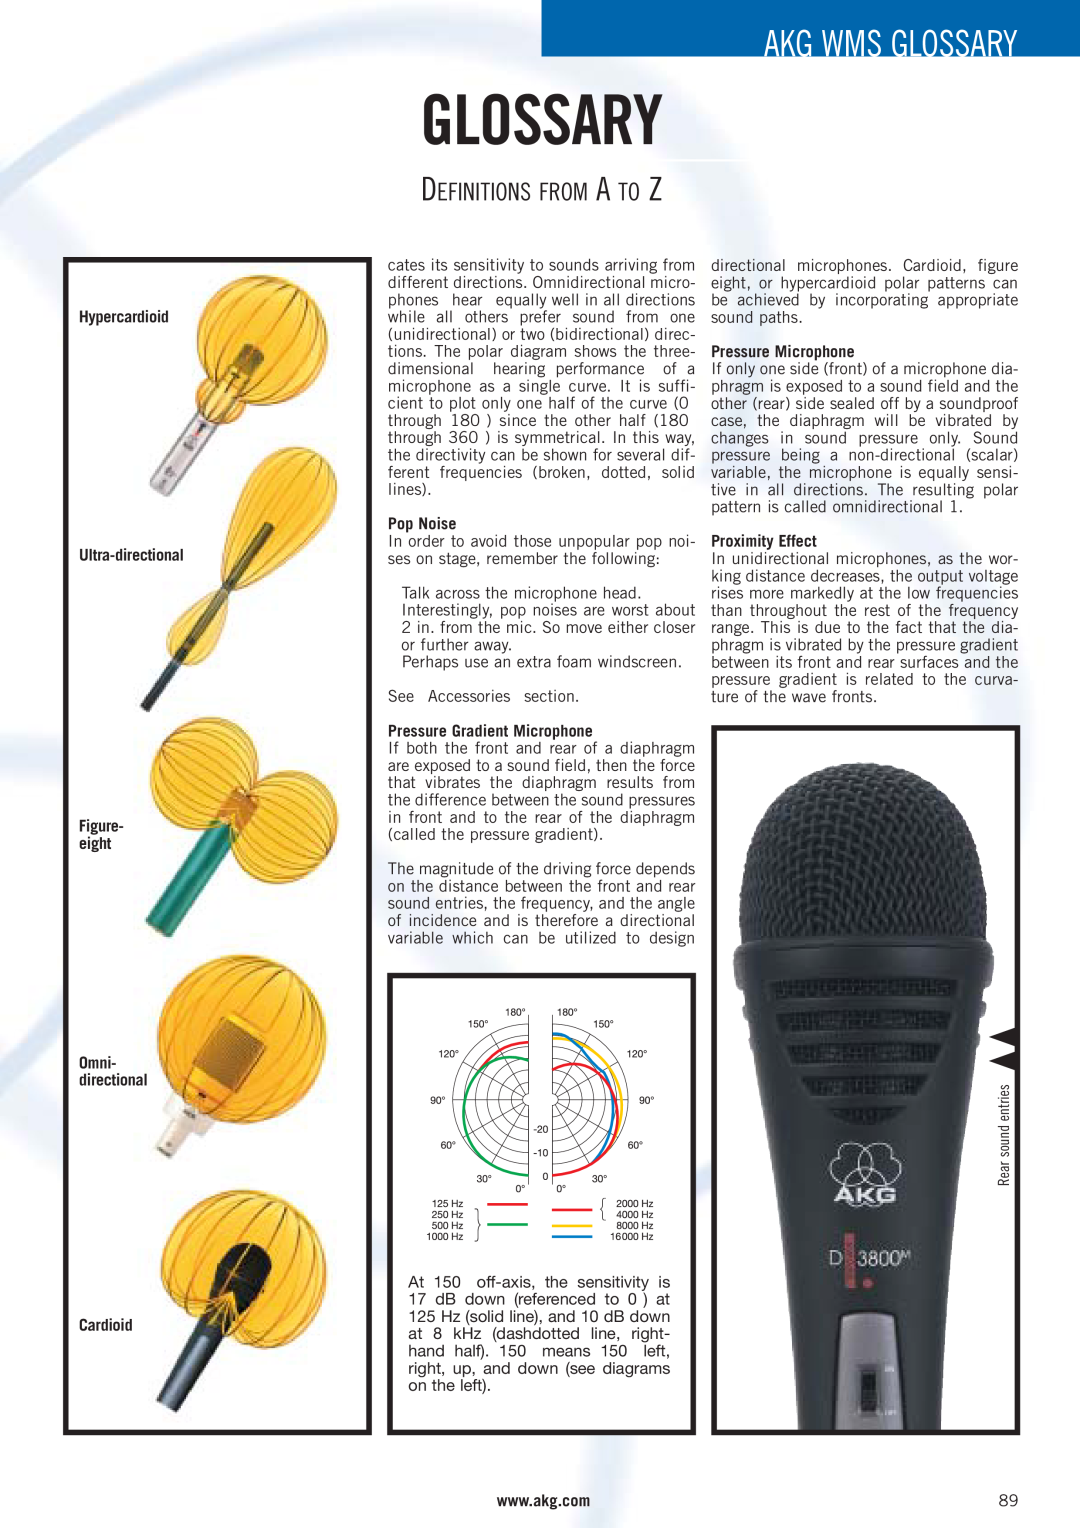 AKG Acoustics WMS 40 Akg Wms Glossary, Definitions From A To Z, Hypercardioid Ultra-directional, Cardioid, Pop Noise 